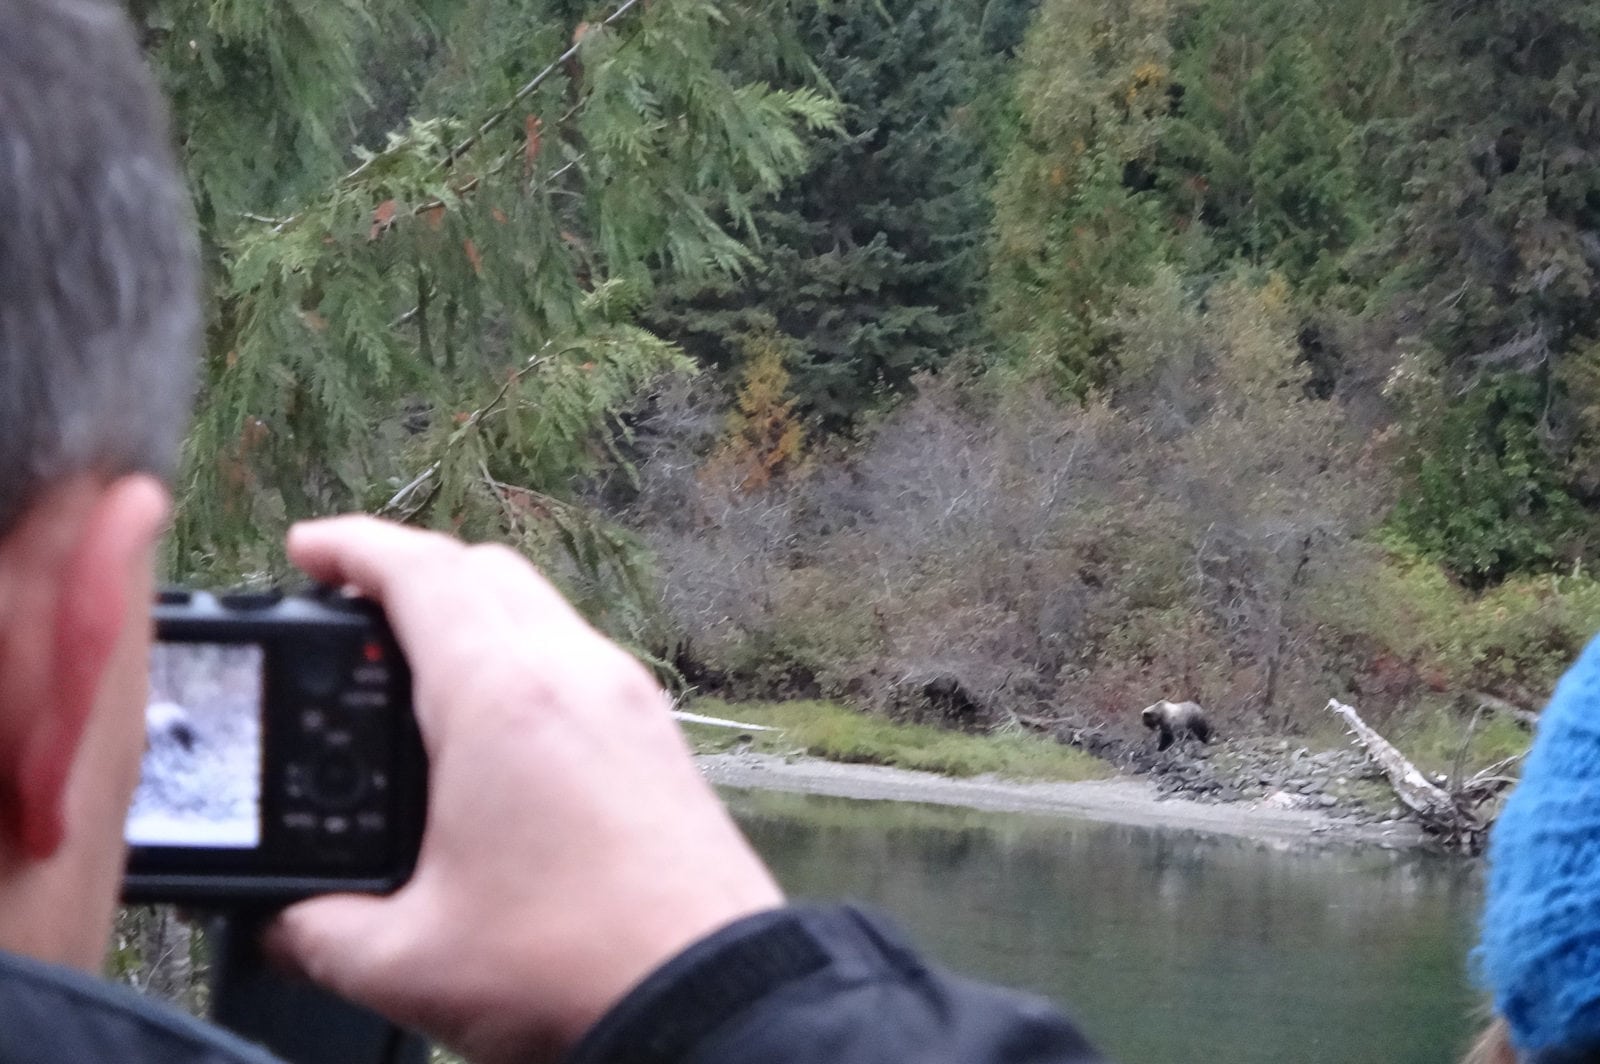 Photographing a grizzly bear at Wild Bear Lodge